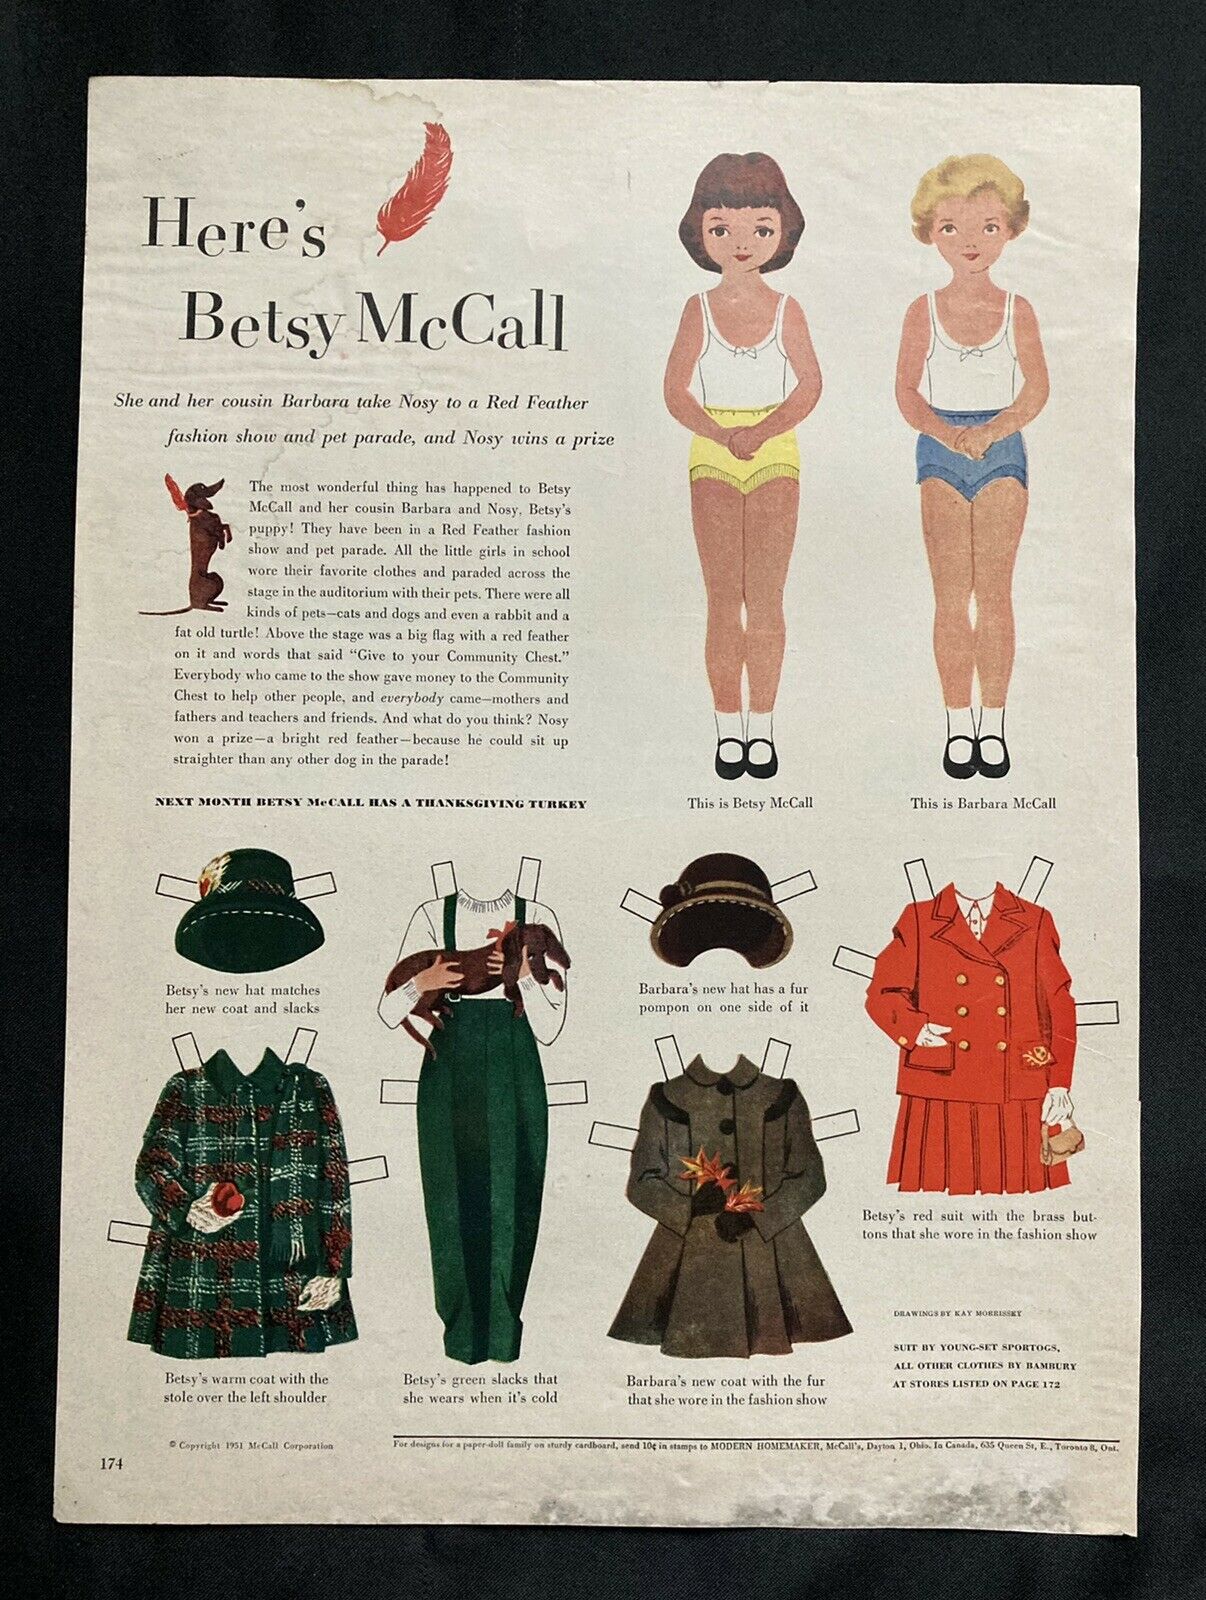 Vintage Betsy Mccall Mag. Paper Dolls, Here’s Betsy Mccall, Oct. 1951